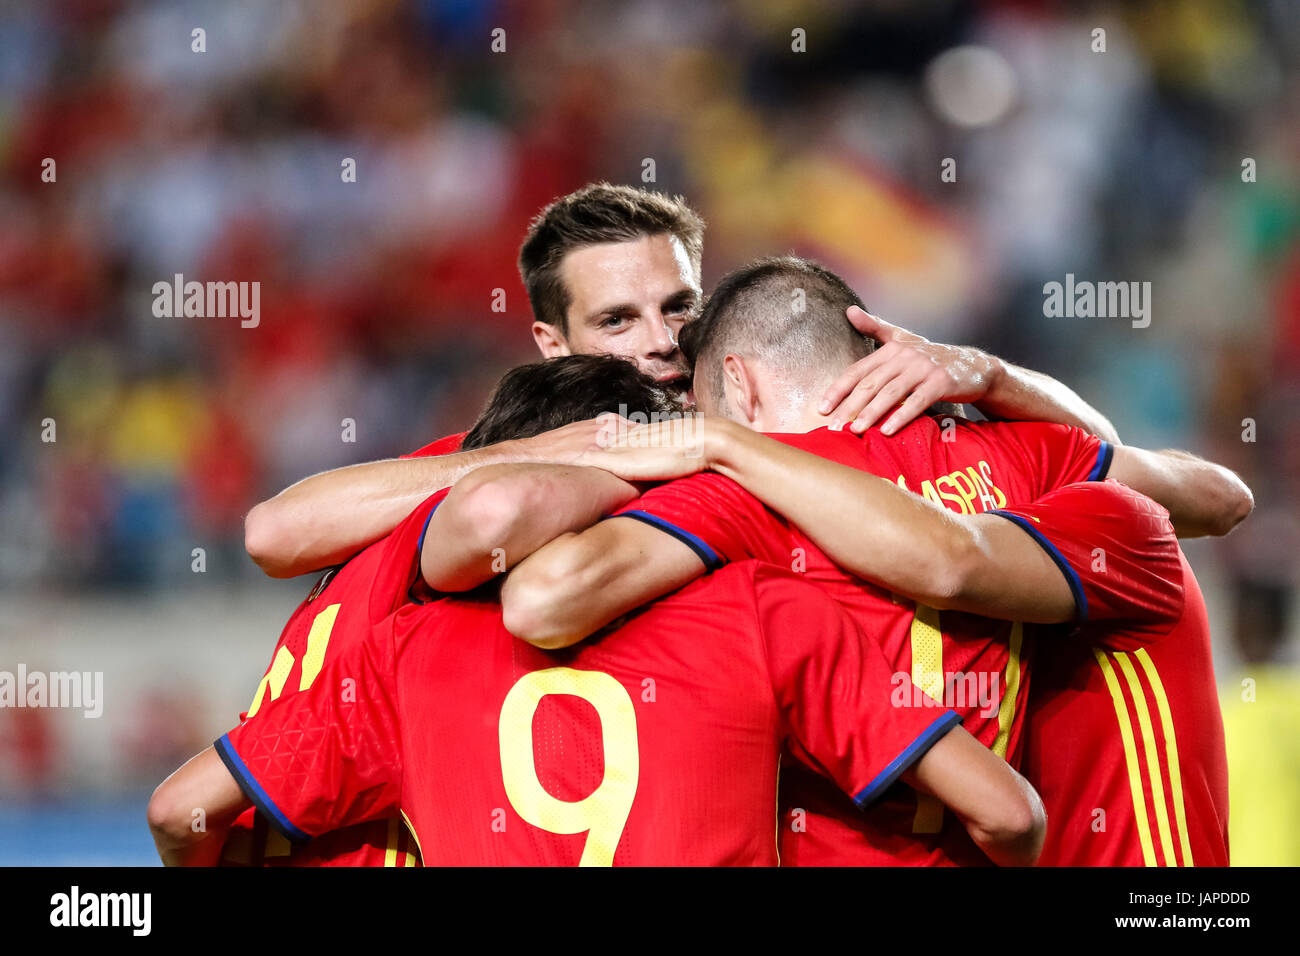 Murcia, Spain. 7th June, 2017. International friendly match between National Football Team of Spain and Colombia at Nueva Condomina Stadium in Murcia. © ABEL F. ROS/Alamy Live News Stock Photo